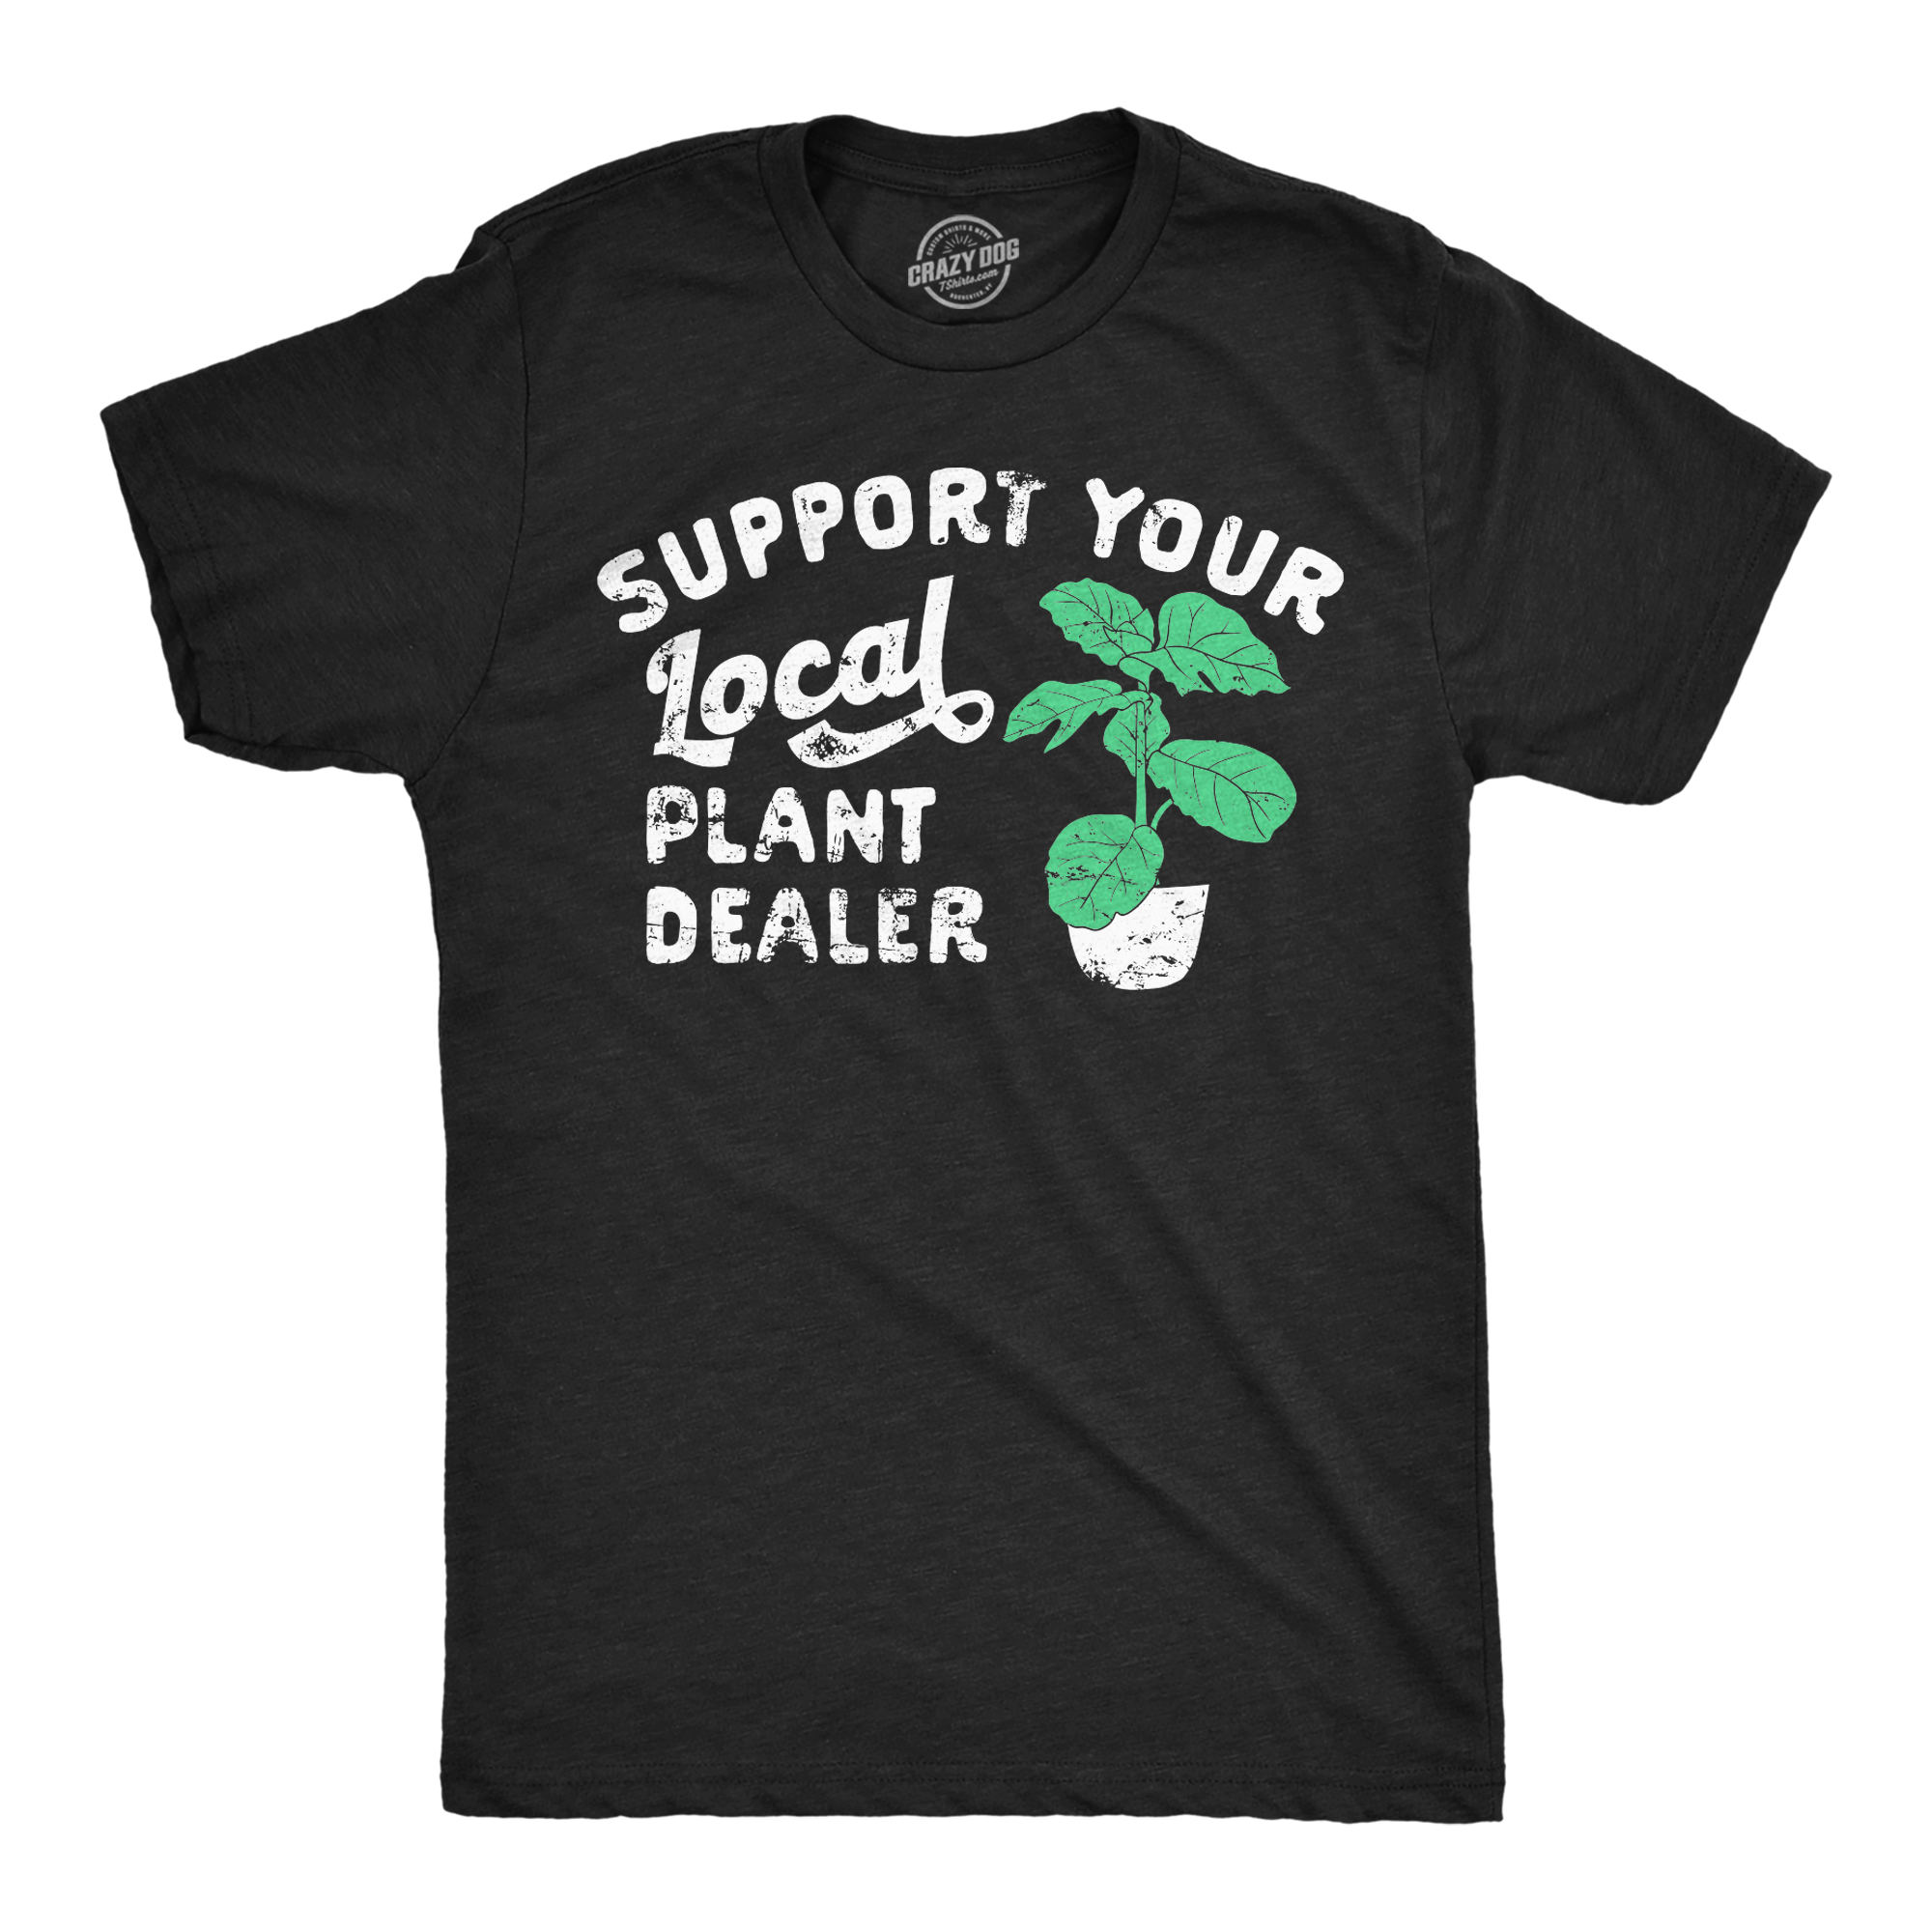 Funny Heather Black - PLANTDEALER Support Your Local Plant Dealer Mens T Shirt Nerdy Sarcastic Tee